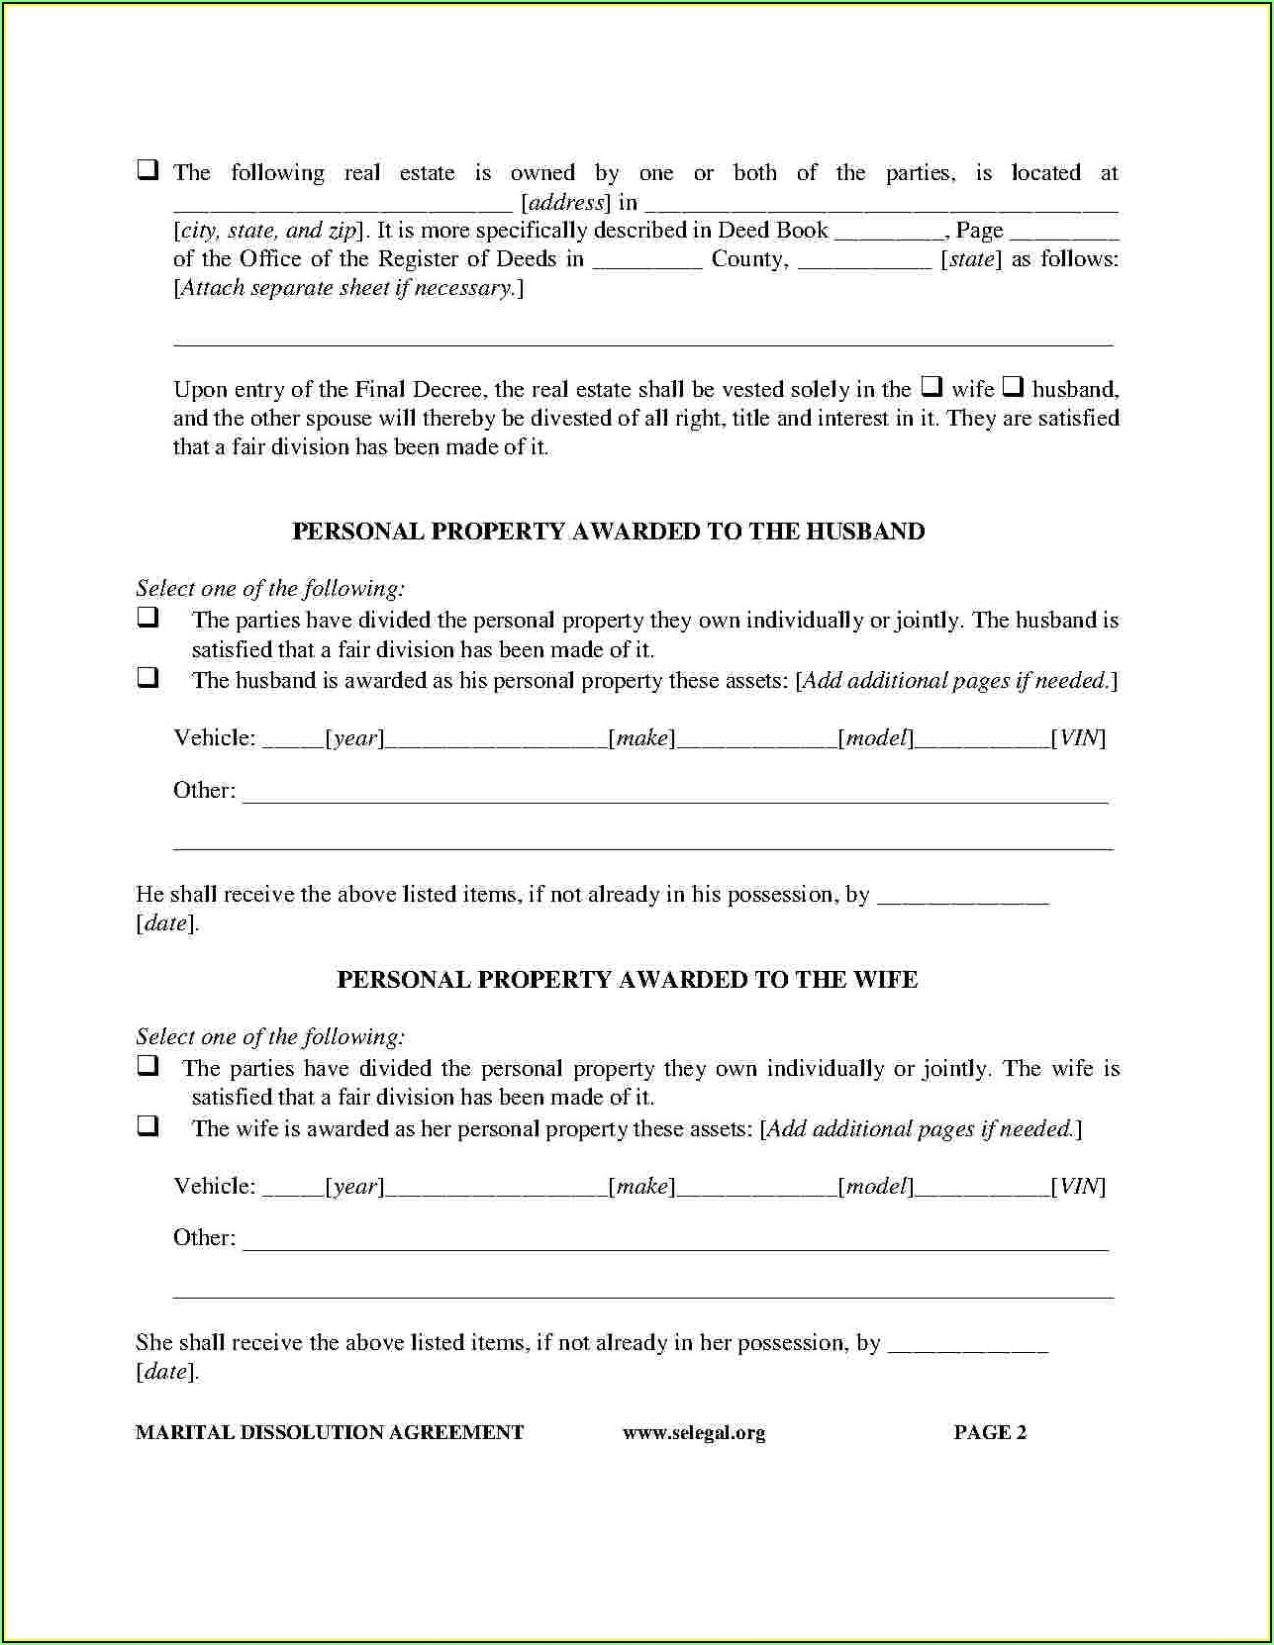 Postnuptial Agreement Template Australia - Template 1 : Resume Examples With Regard To Post Nuptial Agreement Template